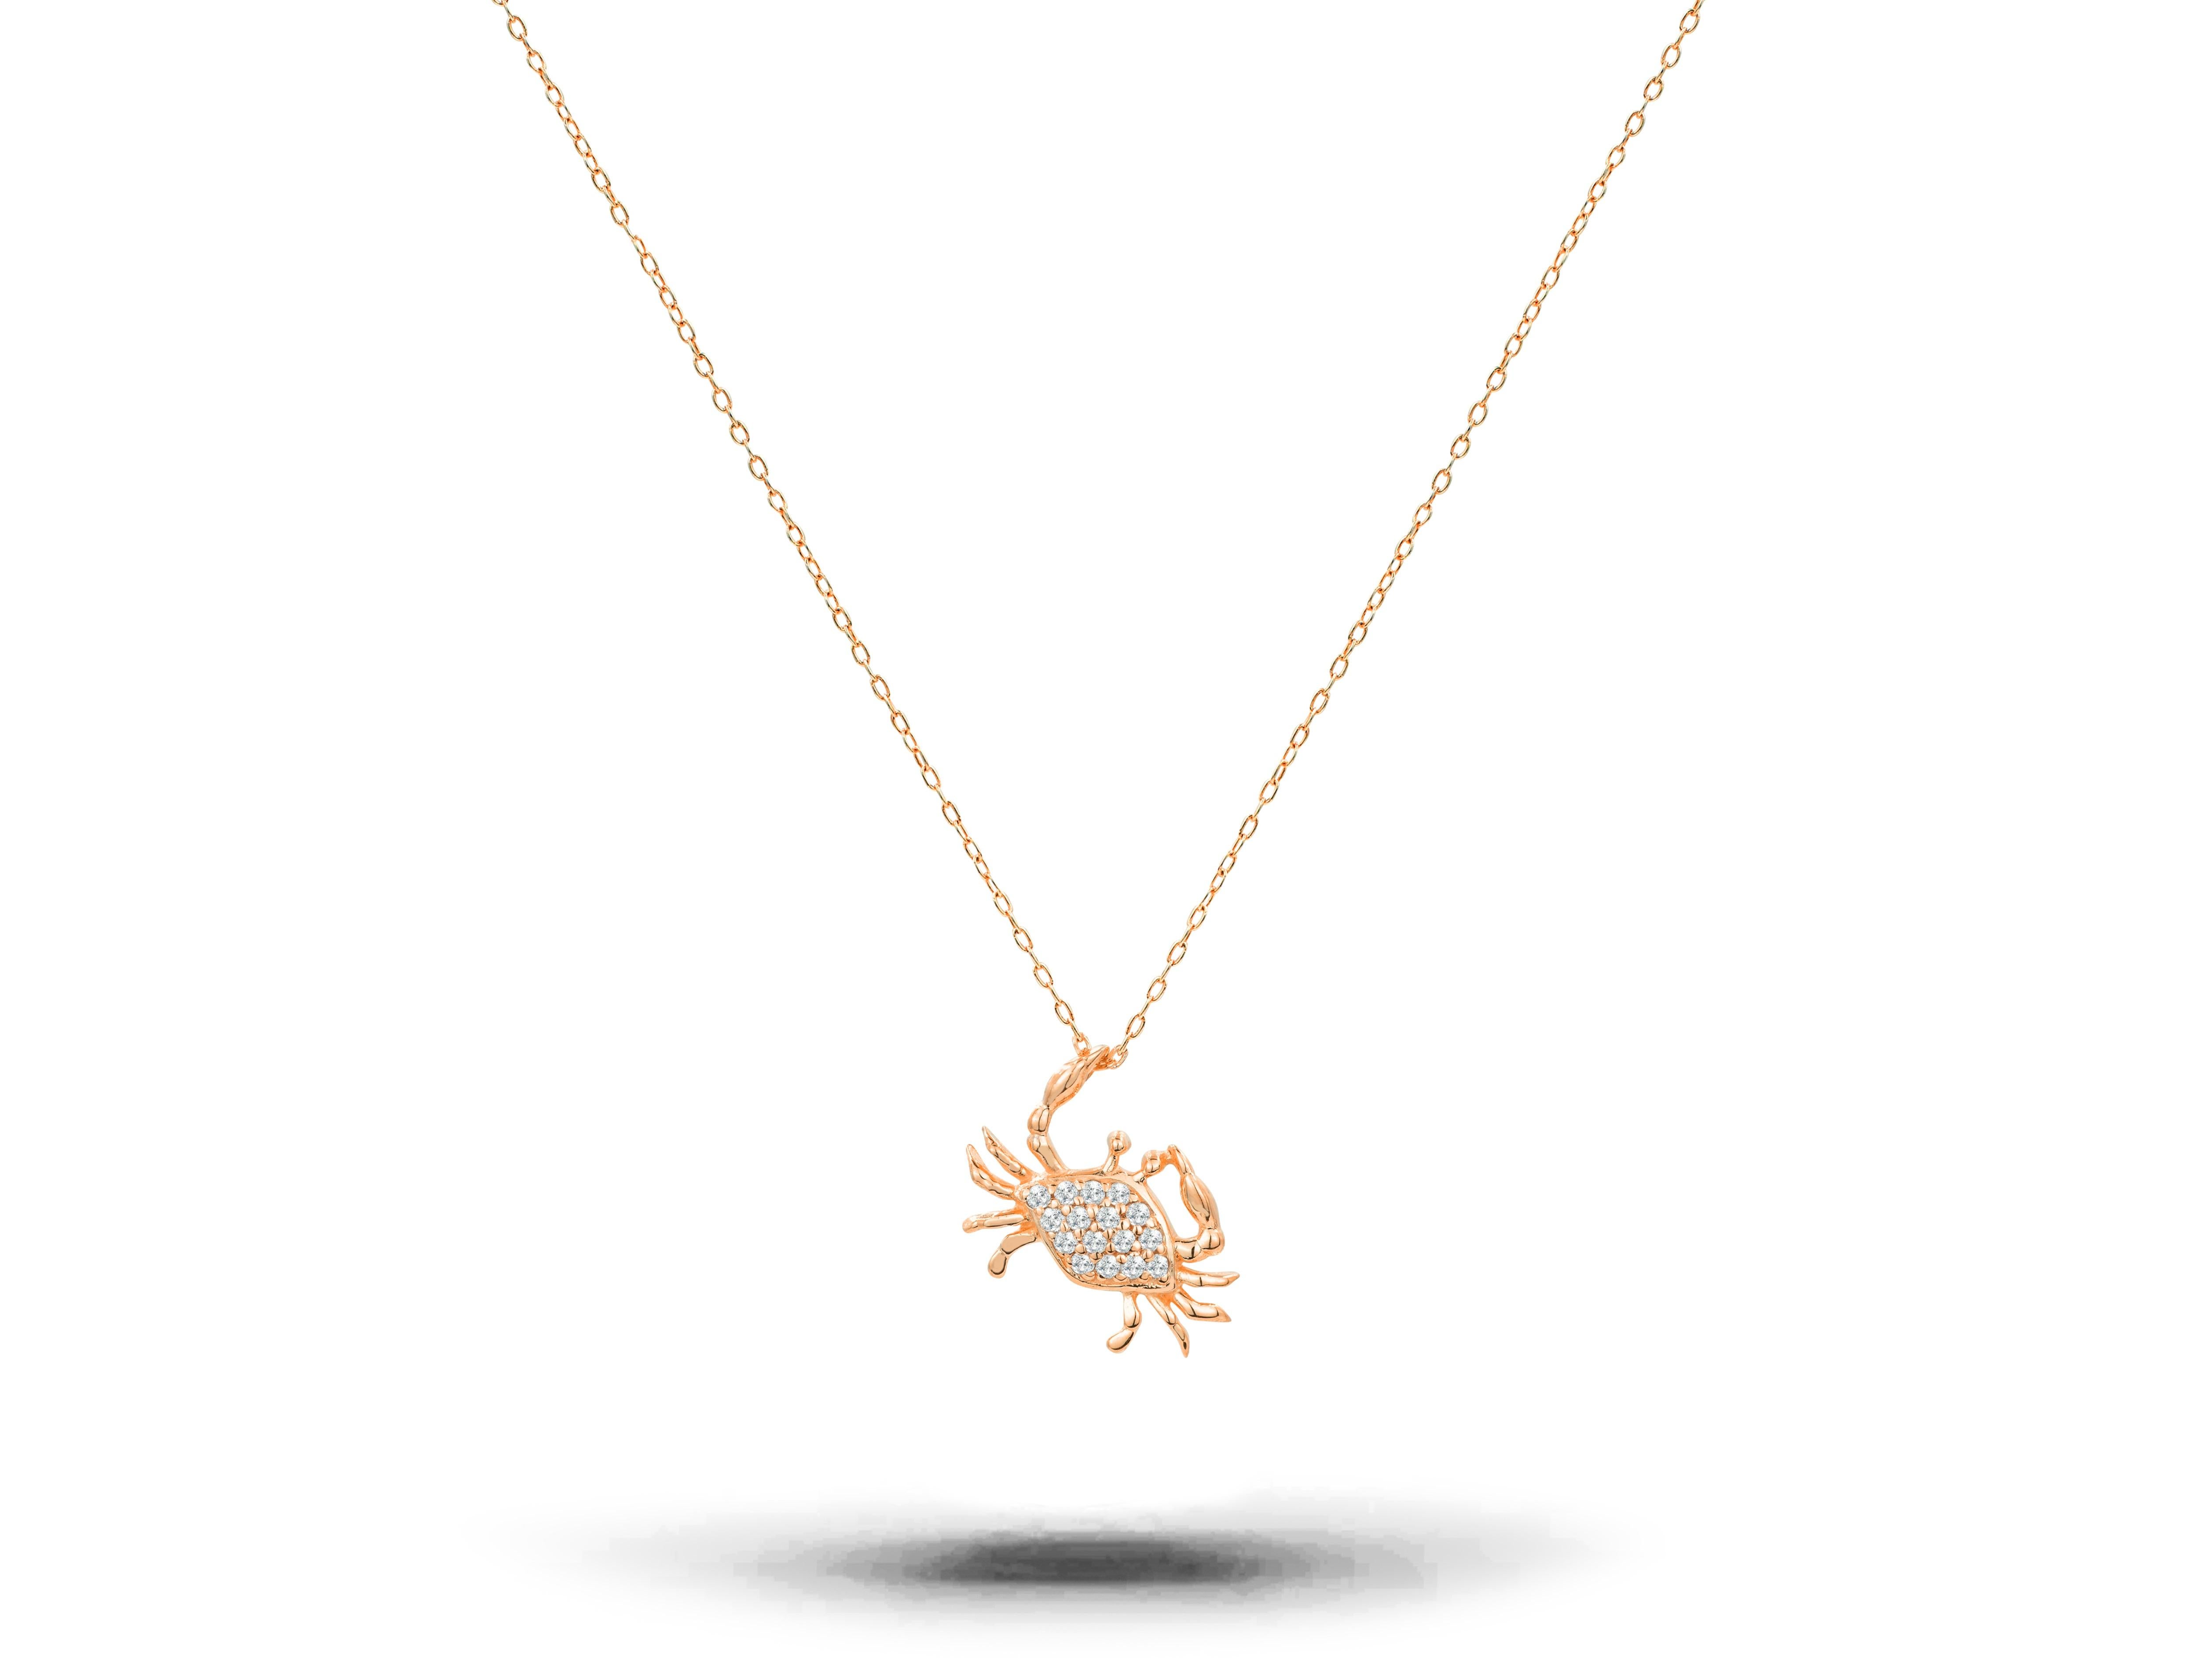 14k Gold Diamond Crab Pendant Necklace  Cancer Zodiac Pendant Necklace  Crab Charm  Ocean Beach Jewelry Sailor Gift Foodie Friend Gift

Delicate dainty Crab charm necklace with natural diamond set in 14k Gold.

